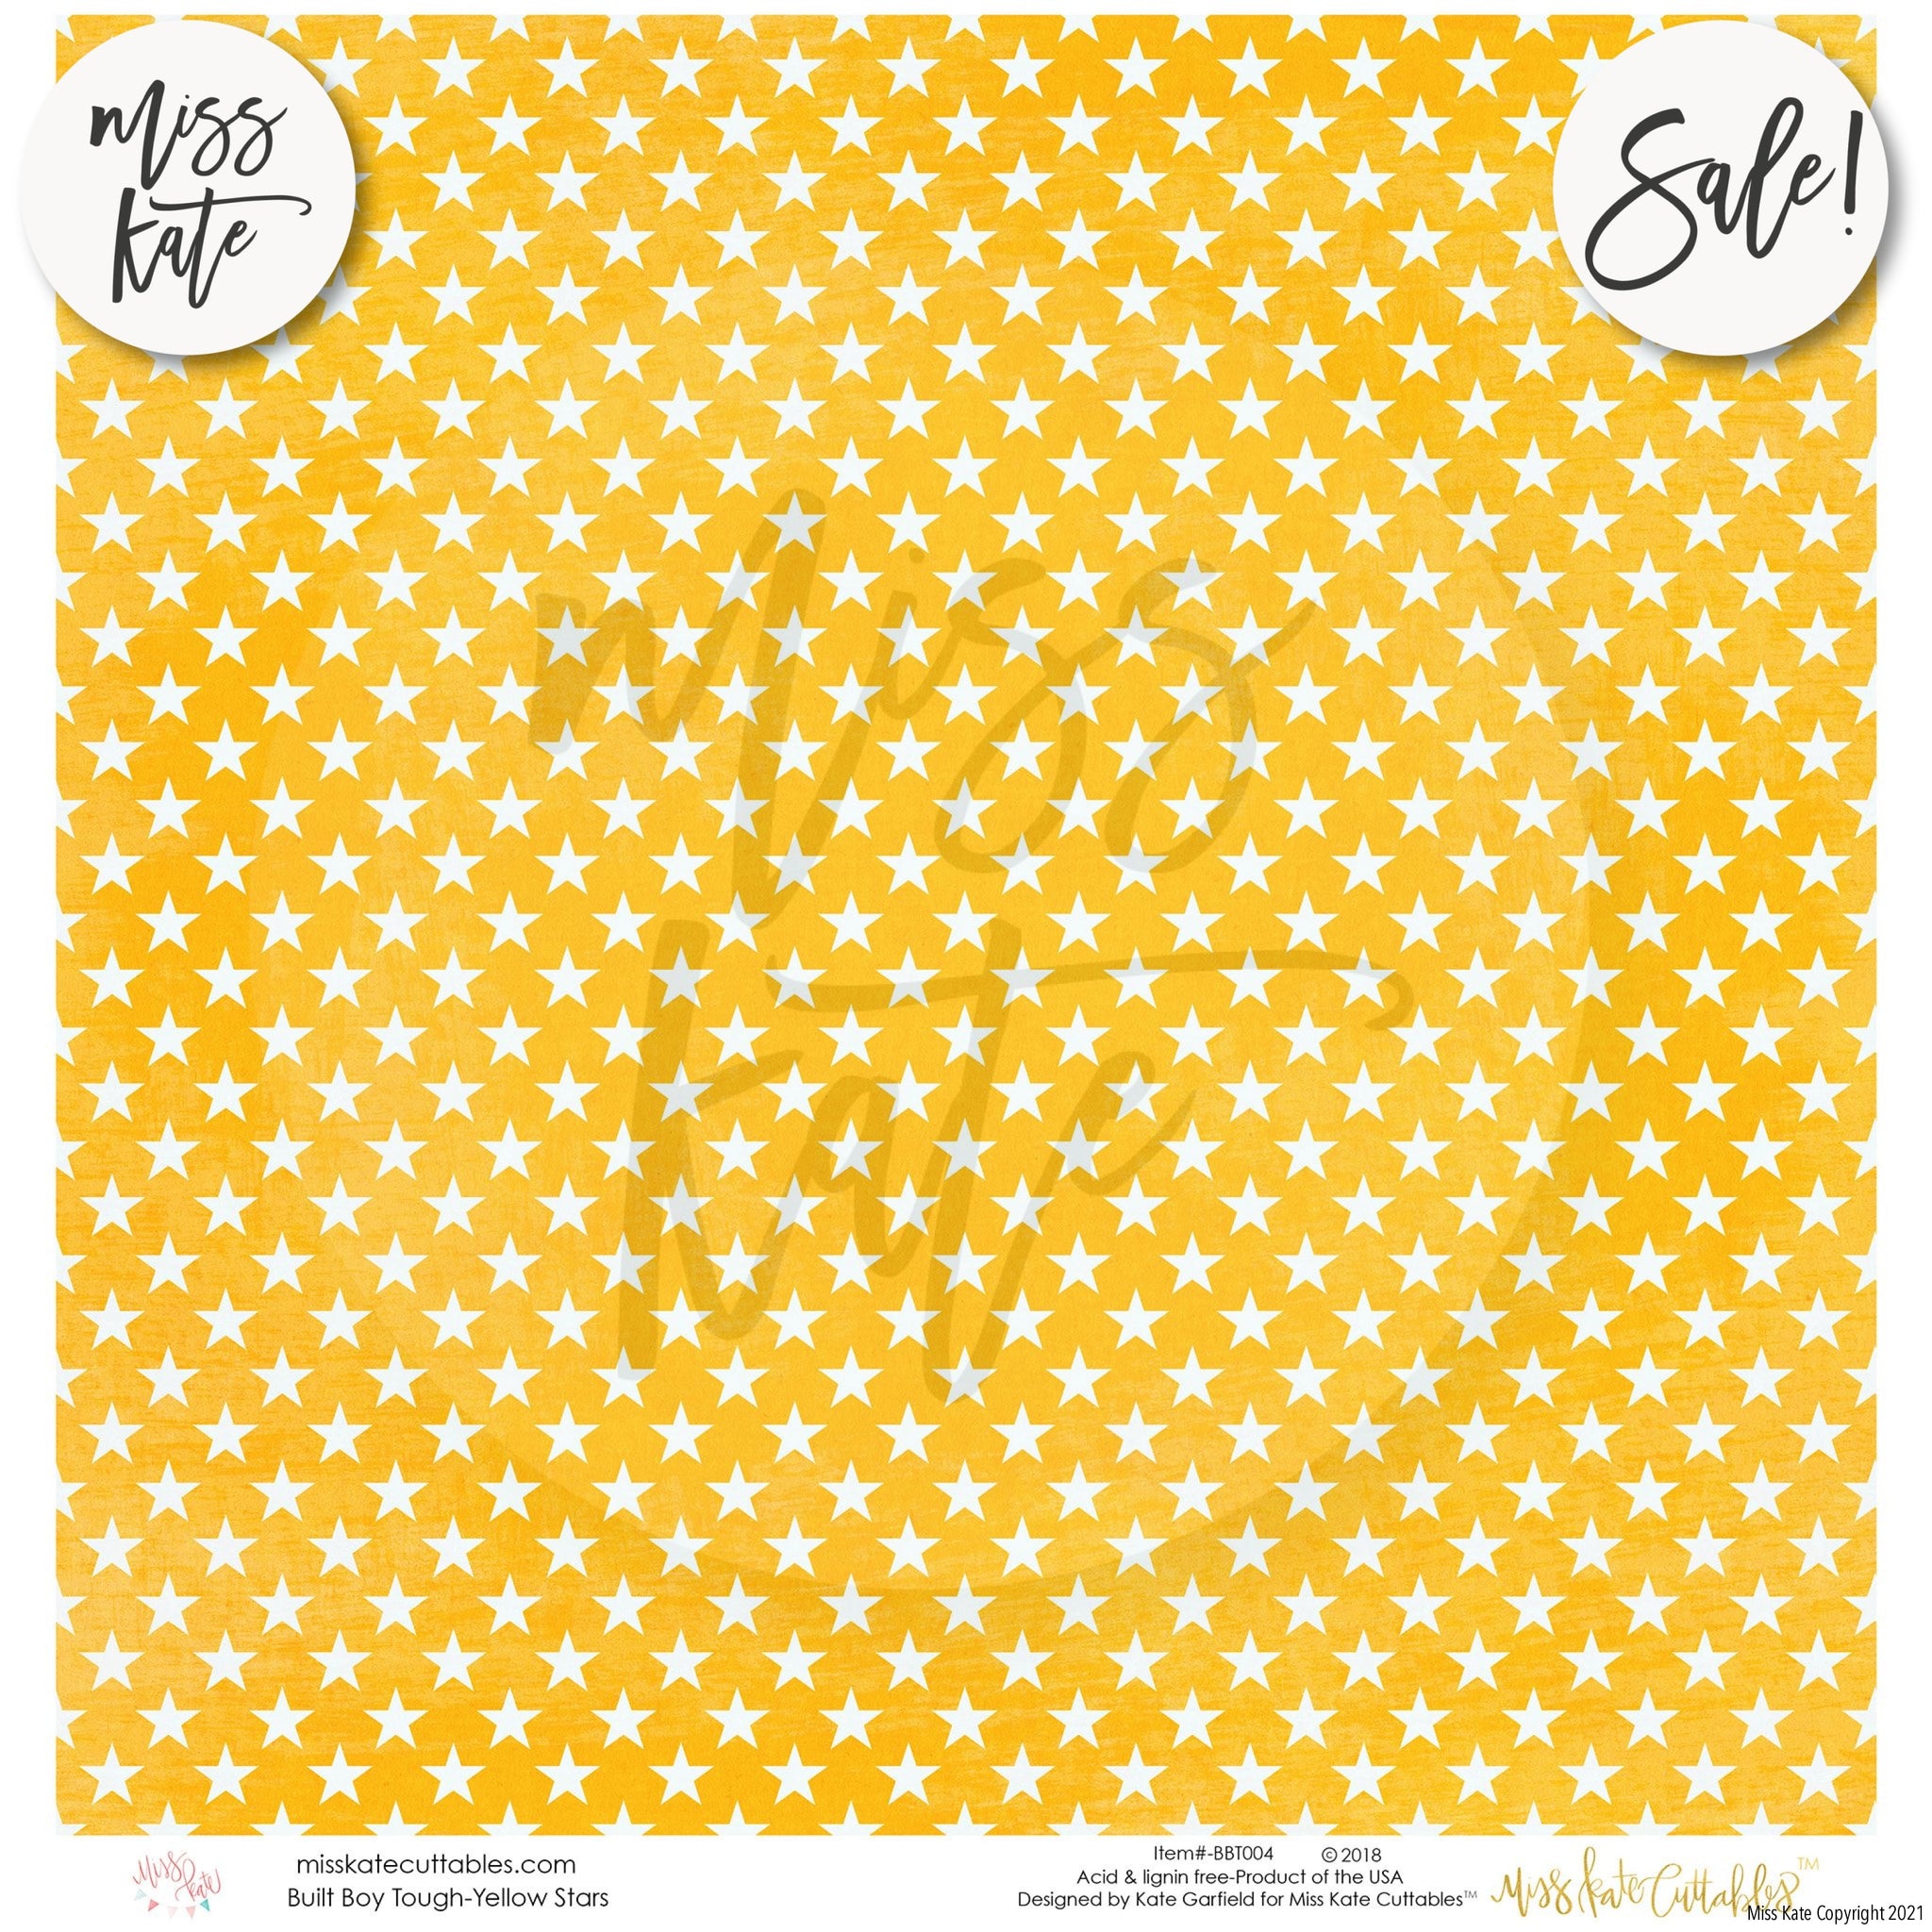 Multi size | 10 sheets | Orange and Yellow| Artist and Craft Paper — Rock  Paper Store - Unique Artist Paper